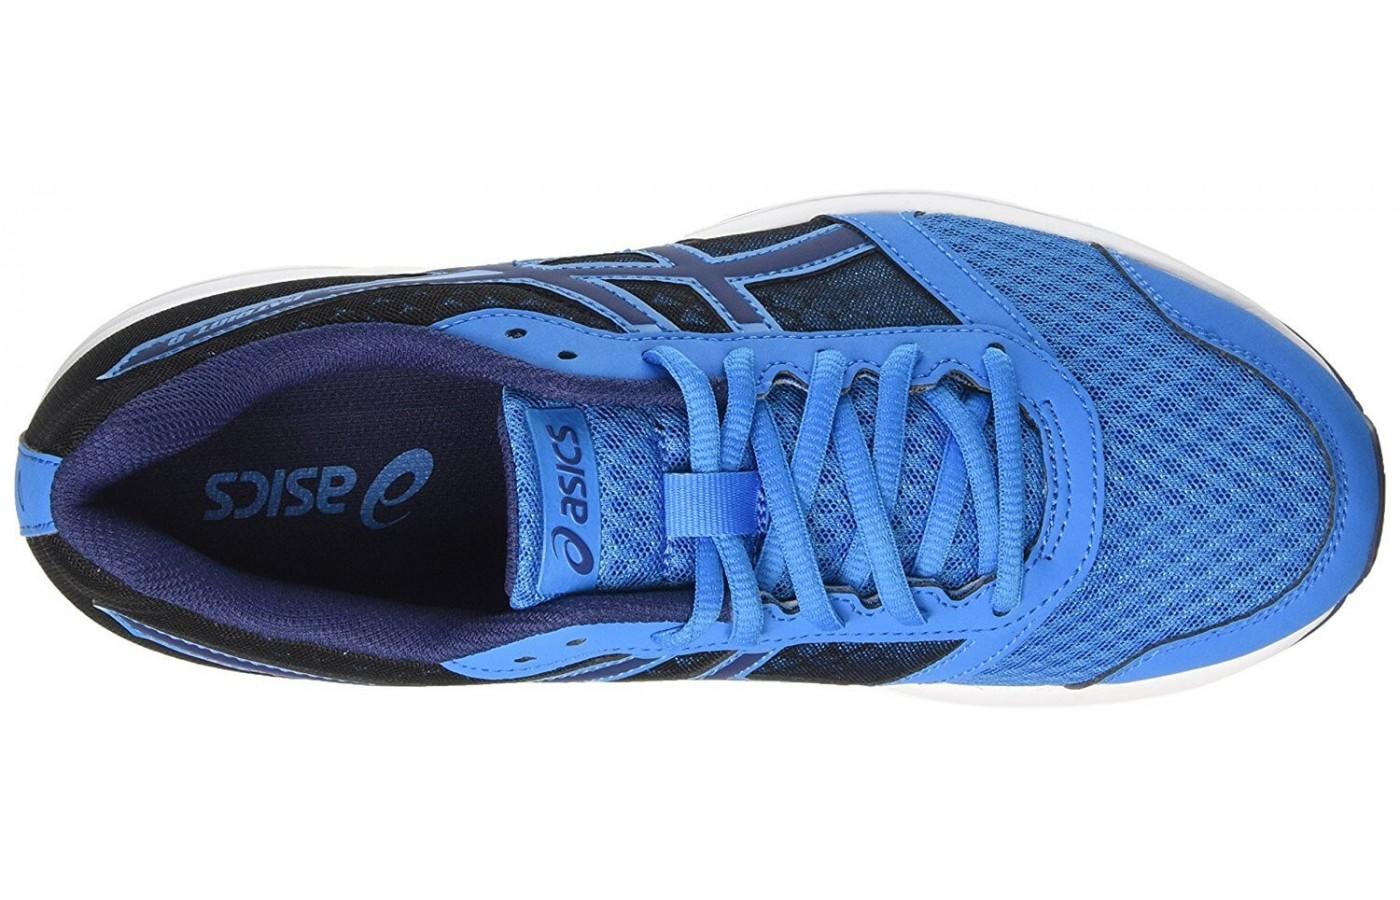 the breathable mesh upper of the ASICS Patriot 8 